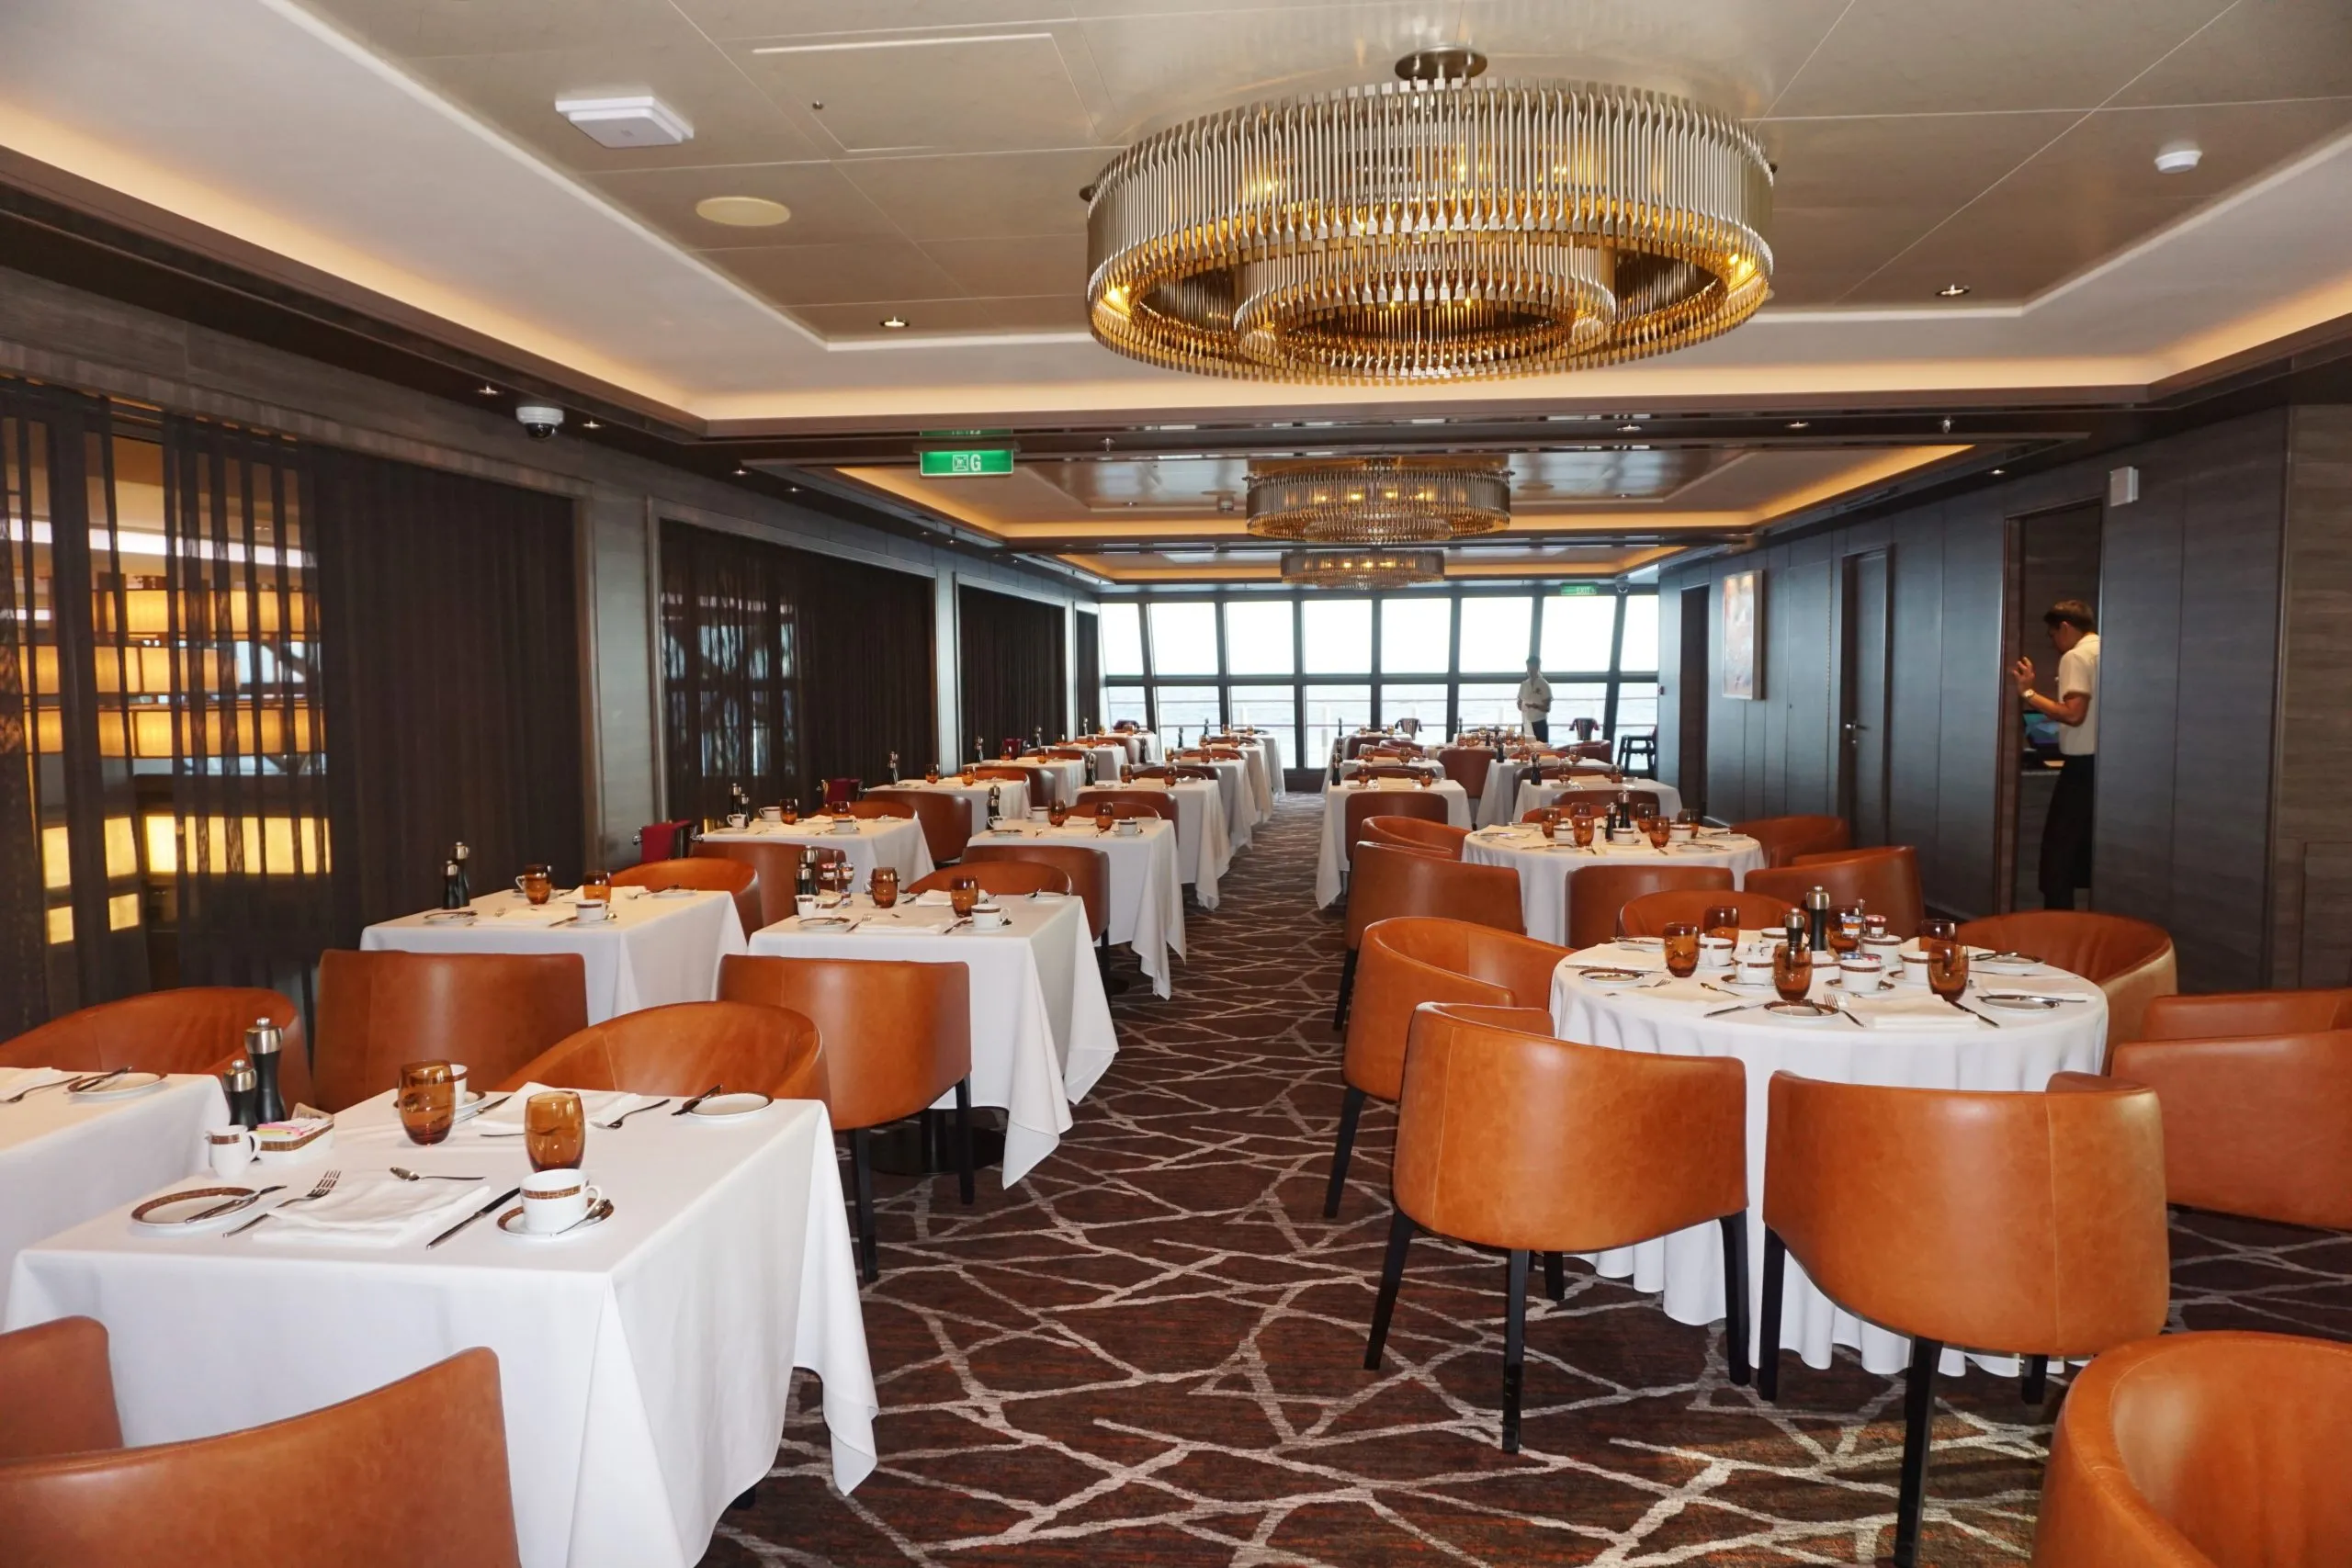 The Complete Guide to Norwegian Cruise Line's Specialty Dining